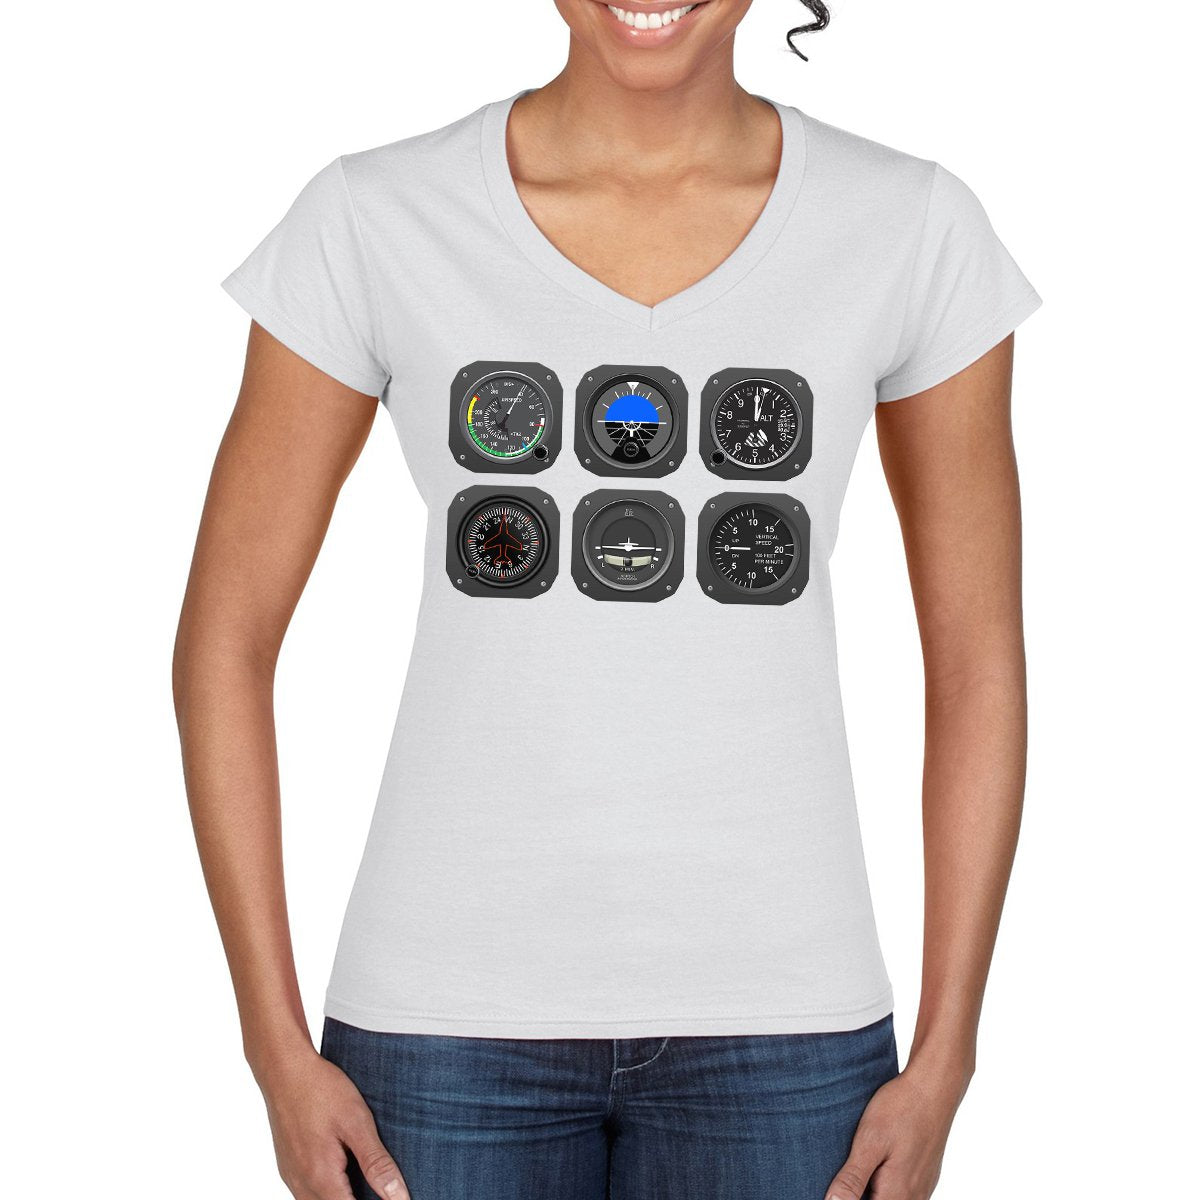 THE PILOT'S 6 PACK Women's Semi-Fitted T-Shirt